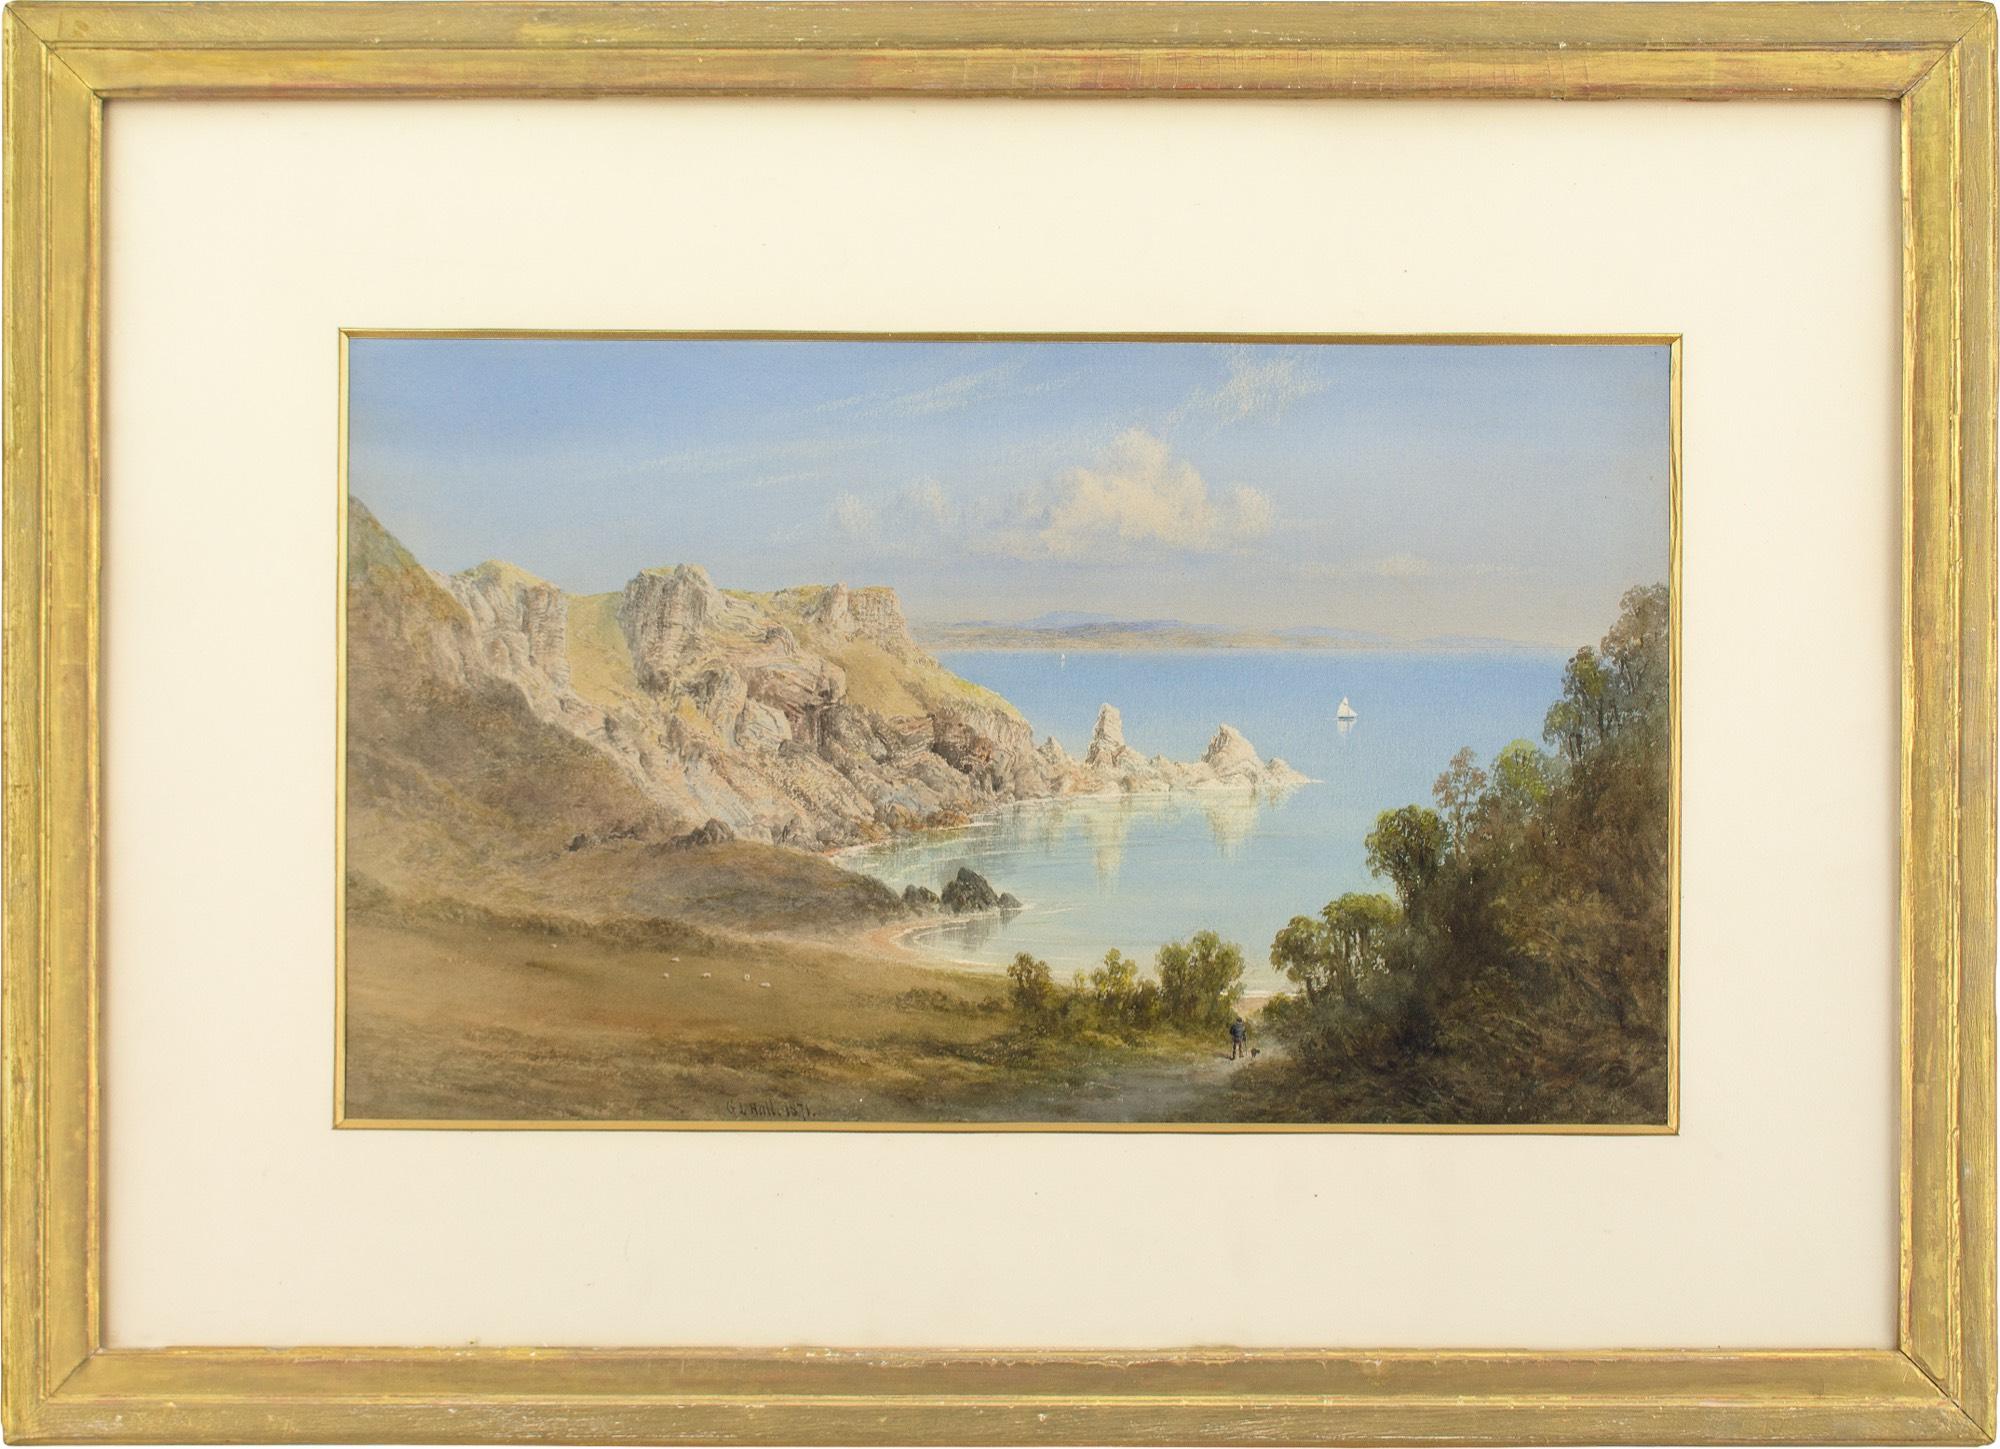 This late 19th-century watercolour by British artist George Lowthian Hall (1825-1888) depicts a radiant view of Anstey Cove in Torquay, Devon.

At the height of Summer, the crystal clear waters and brilliant blue sky seem distinctly Mediterranean.